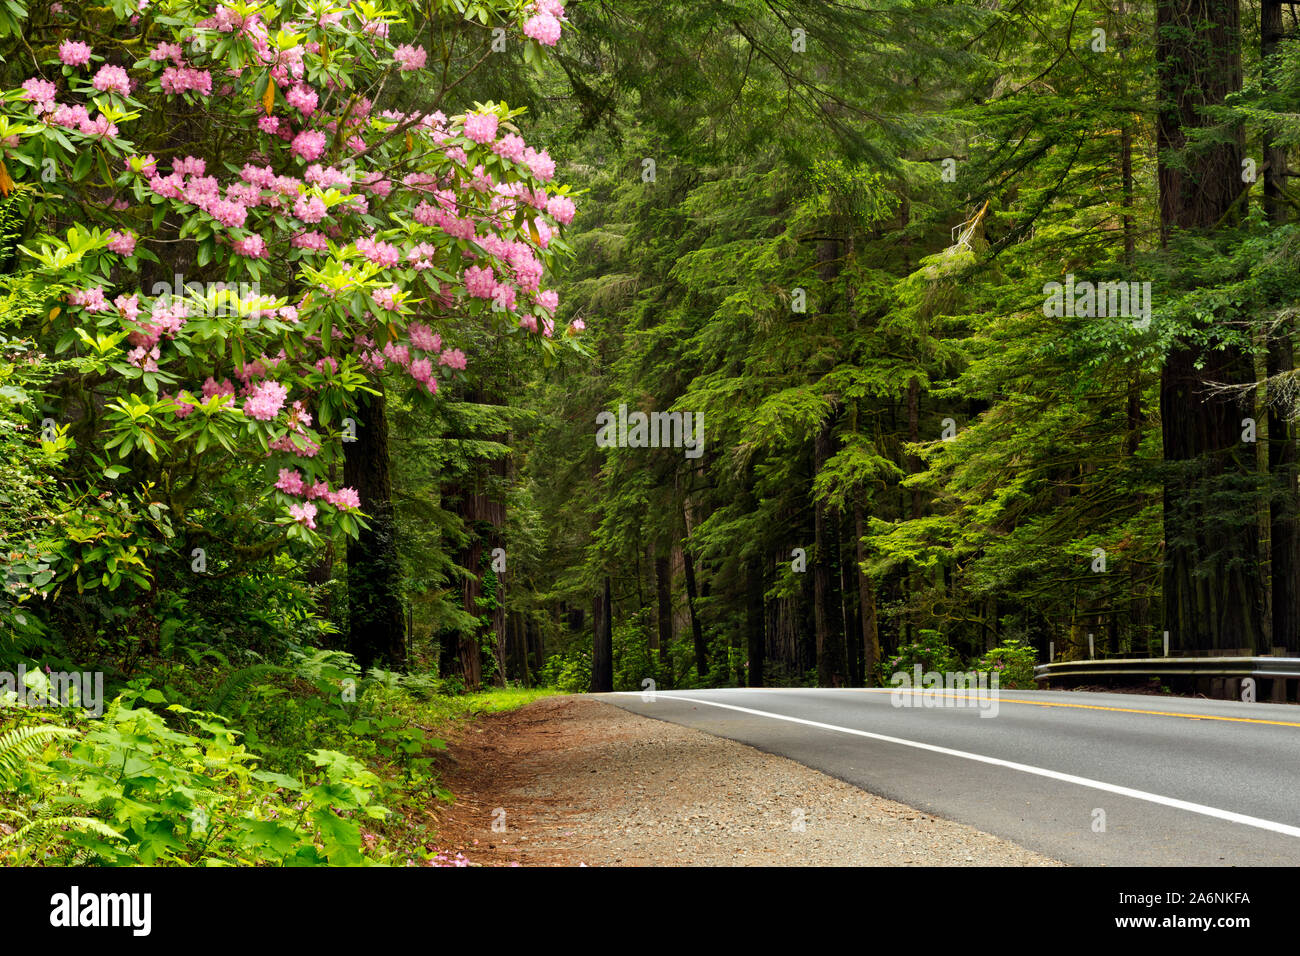 CA03810-00...CALIFORNIA - Native rhododendron in full bloom along Highway 199 in Jedediah Smith Redwoods State Park; part of the Redwoods National and Stock Photo